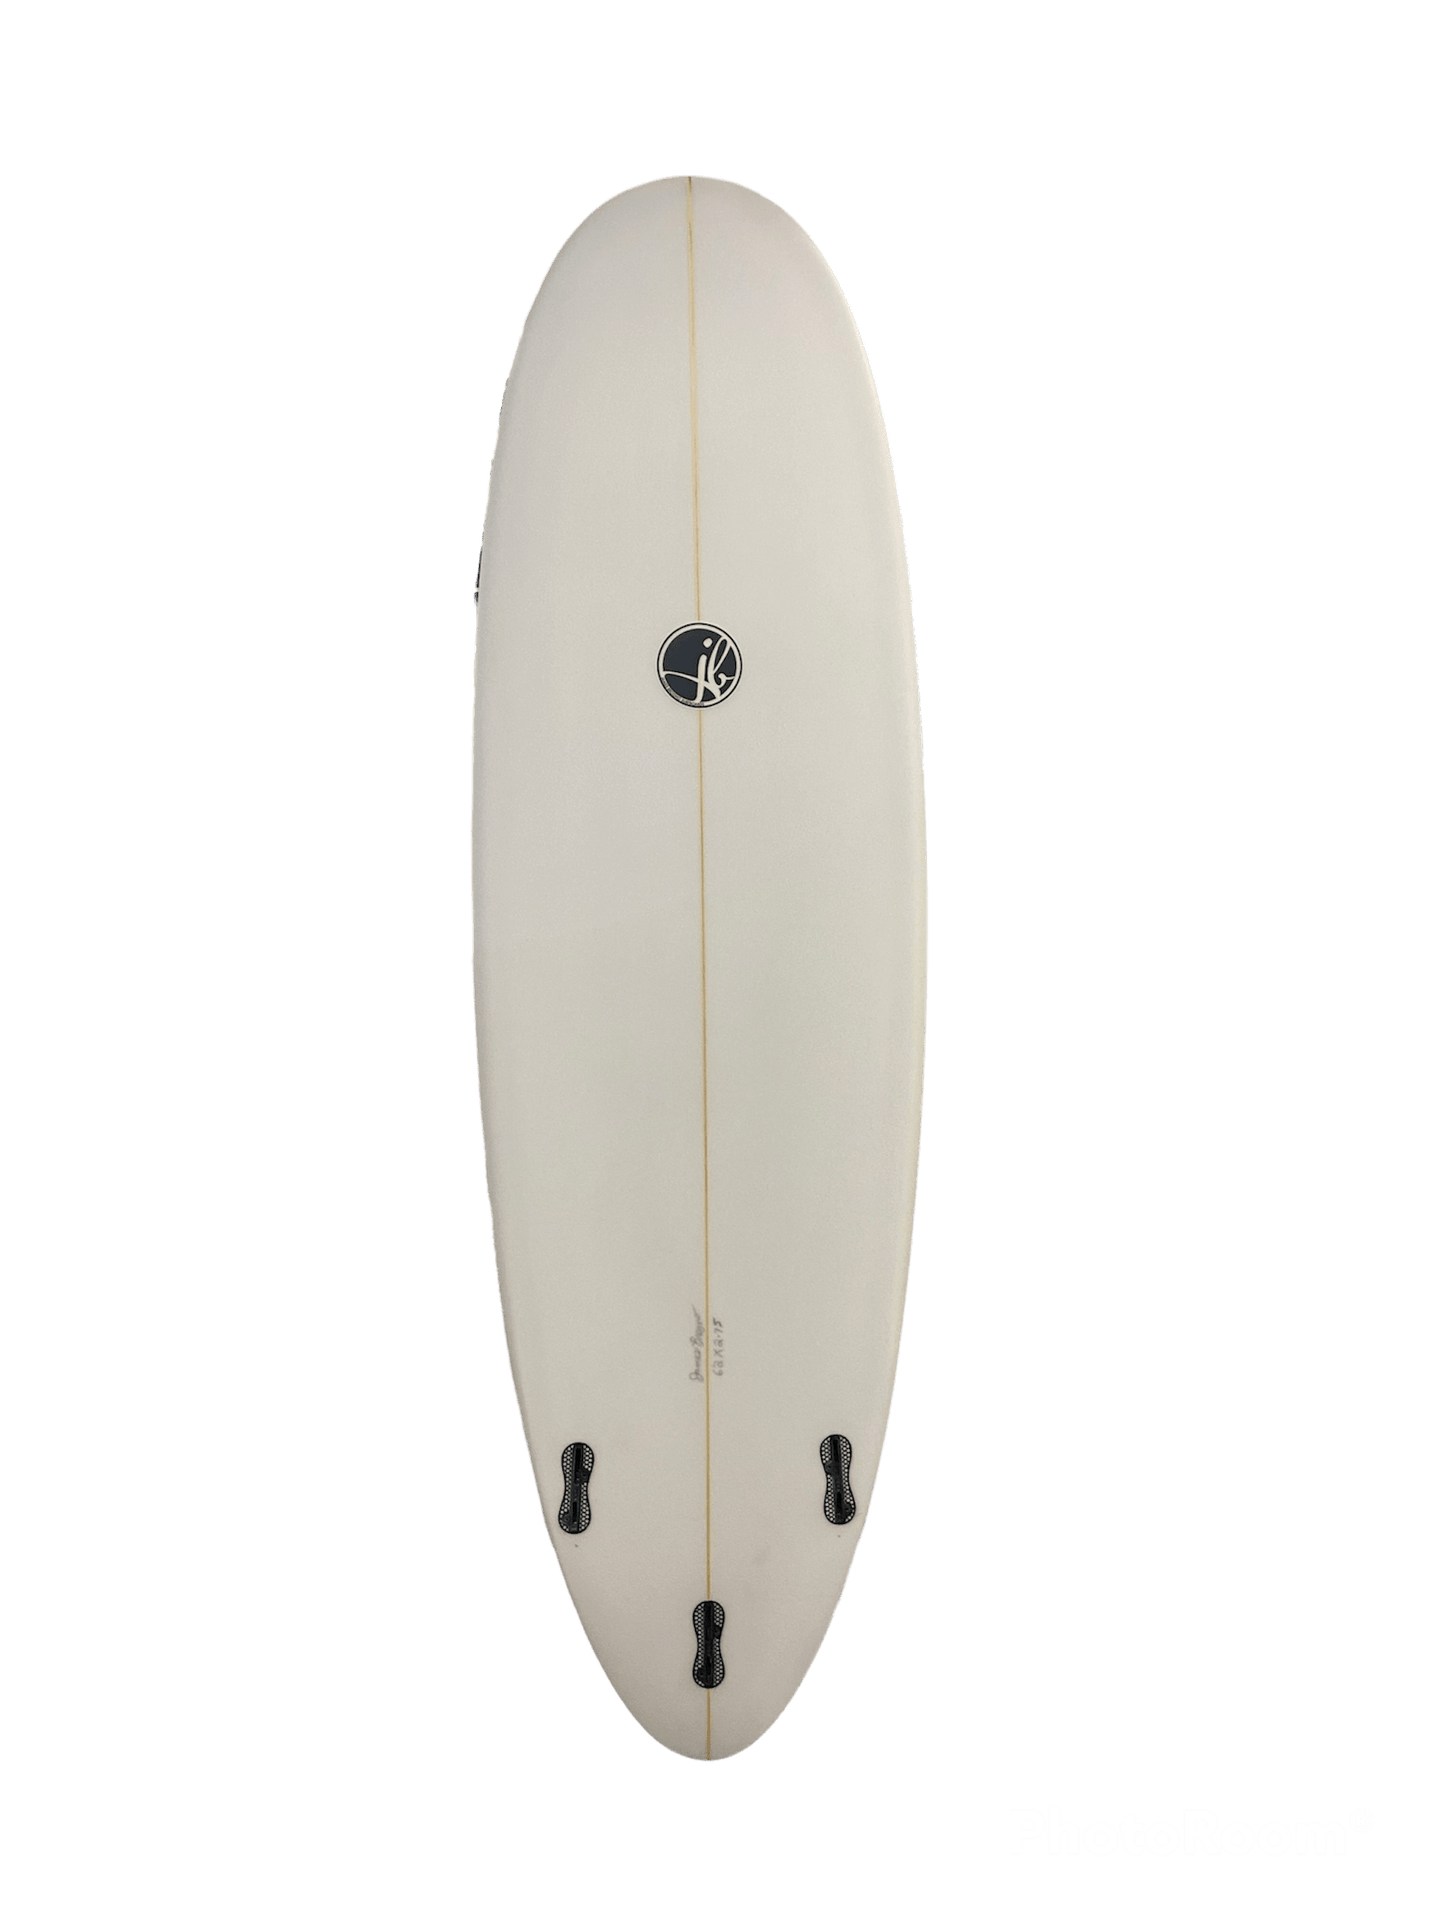 6'2 Muzzy Round Nose Round Tail Surfboard Surfboards